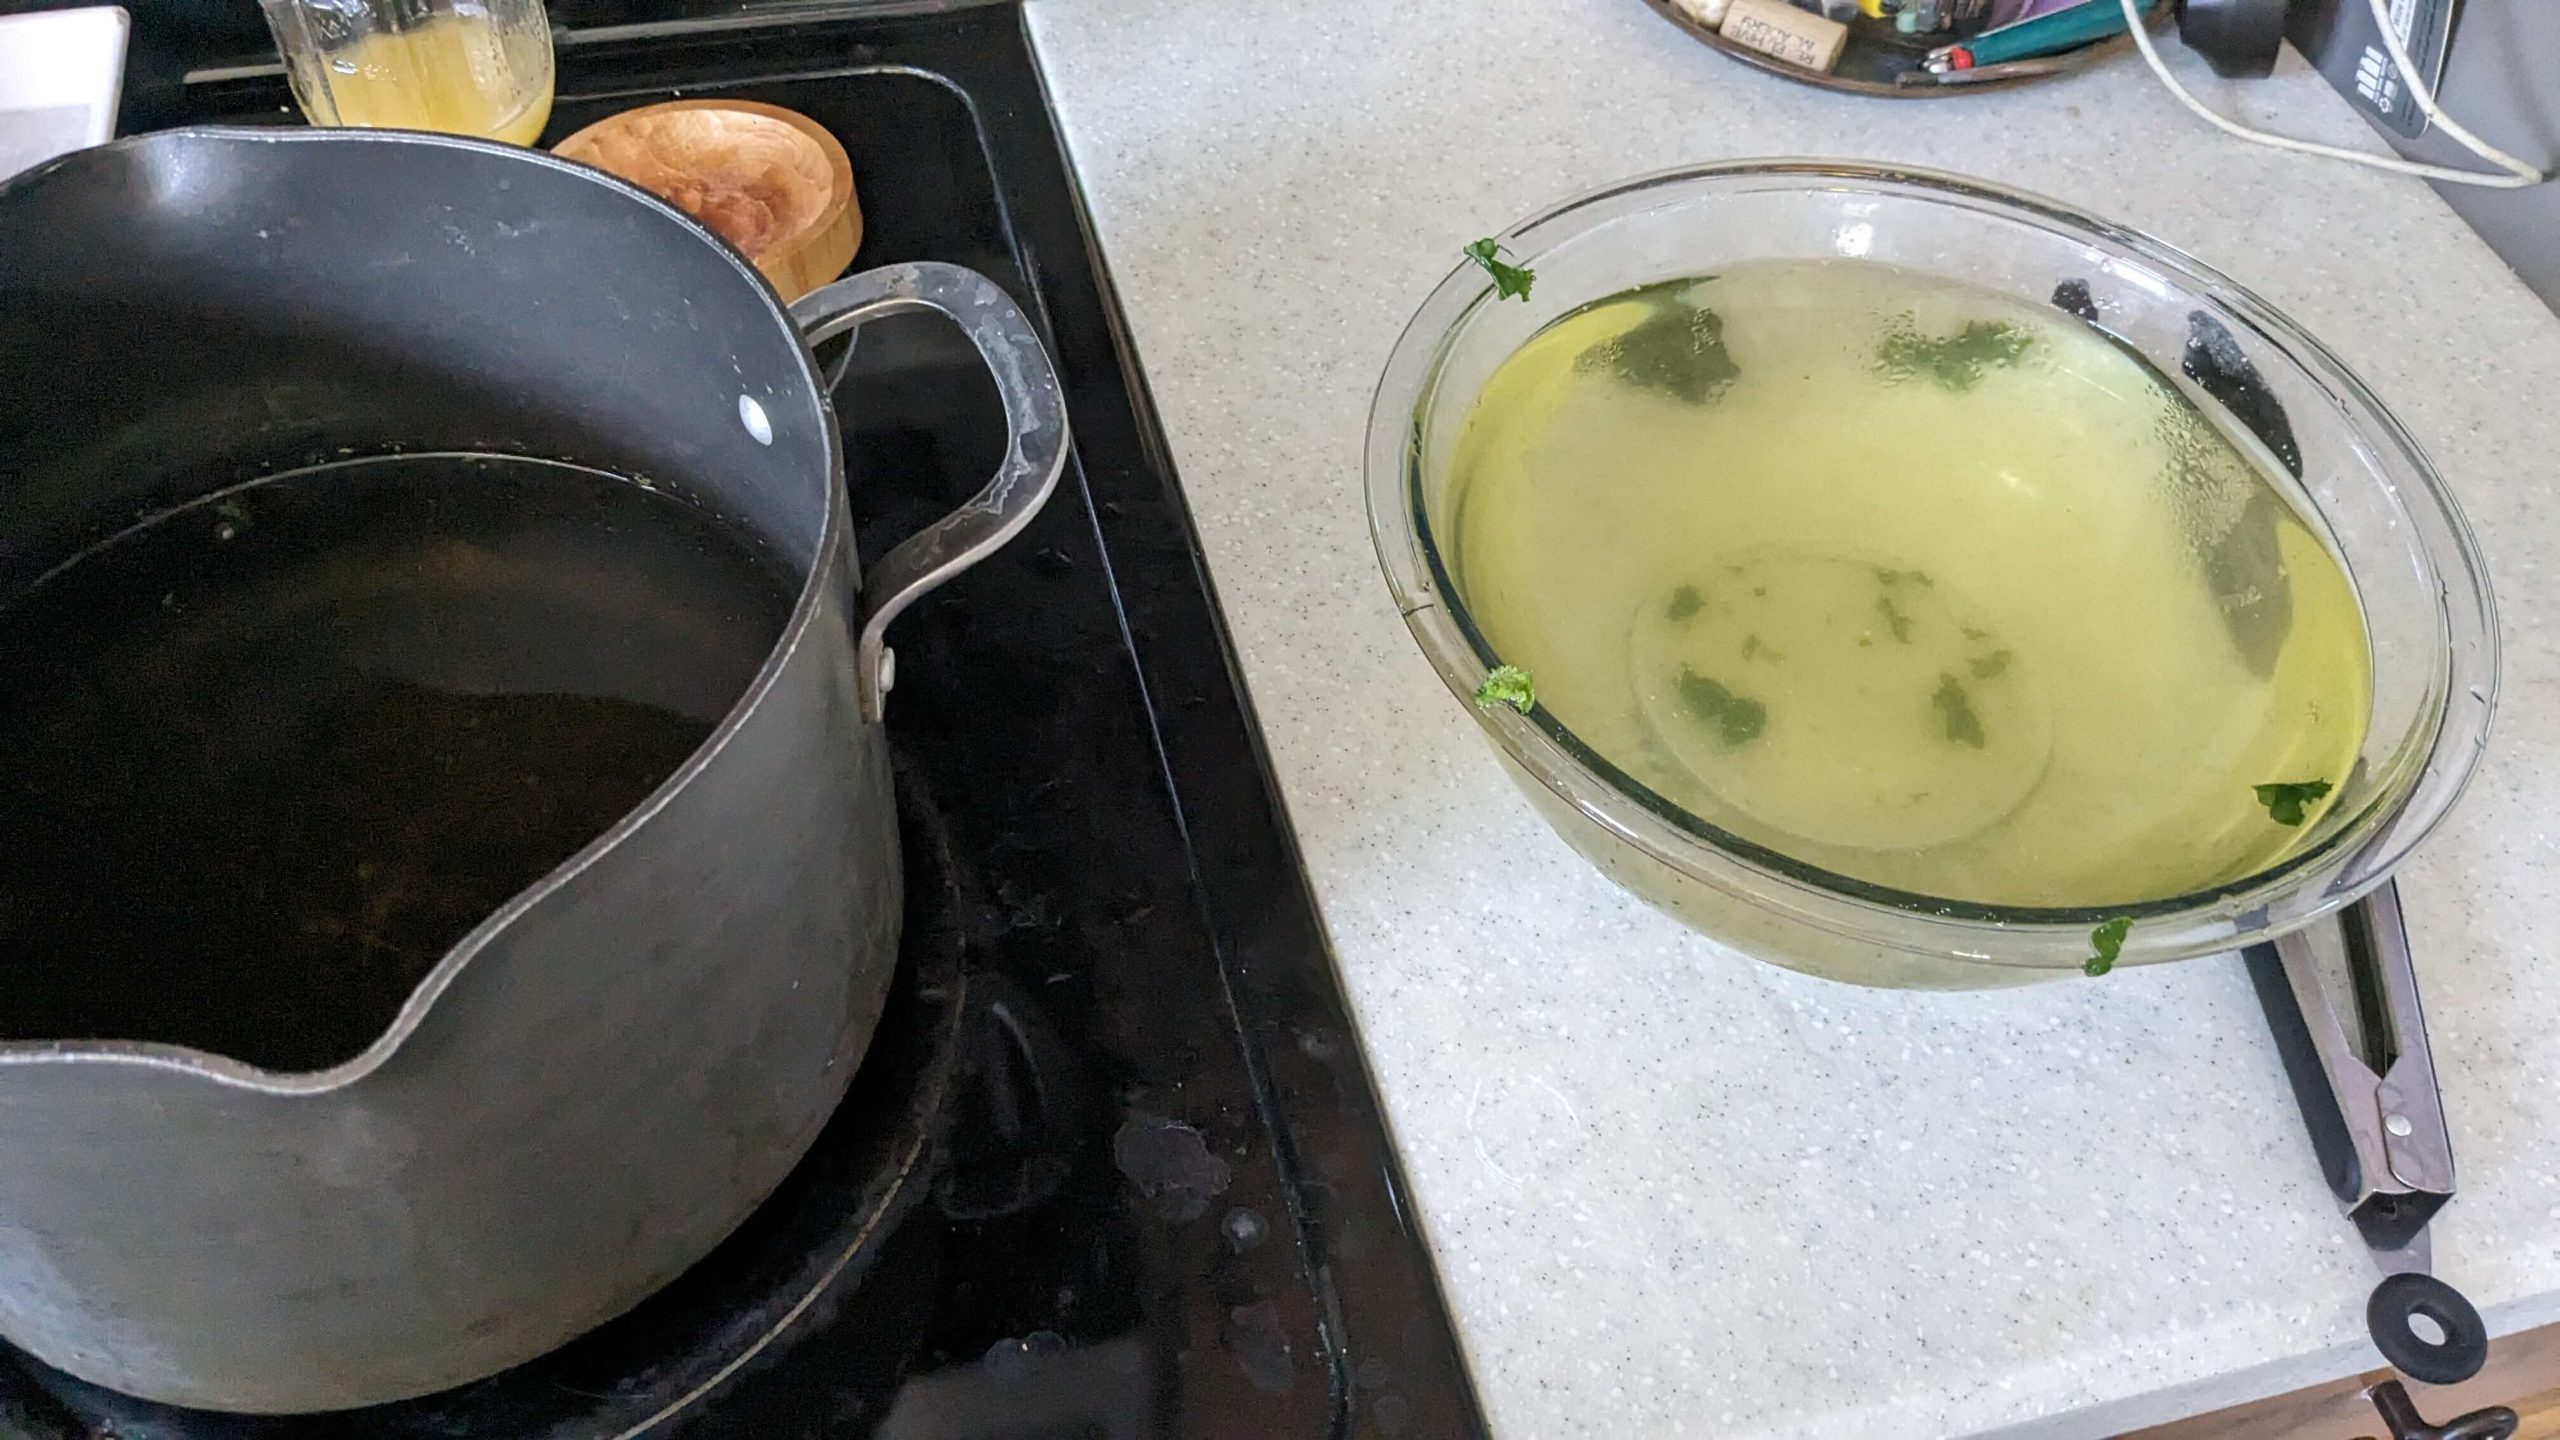 pot with water and a bowl with yellow and green tinted water